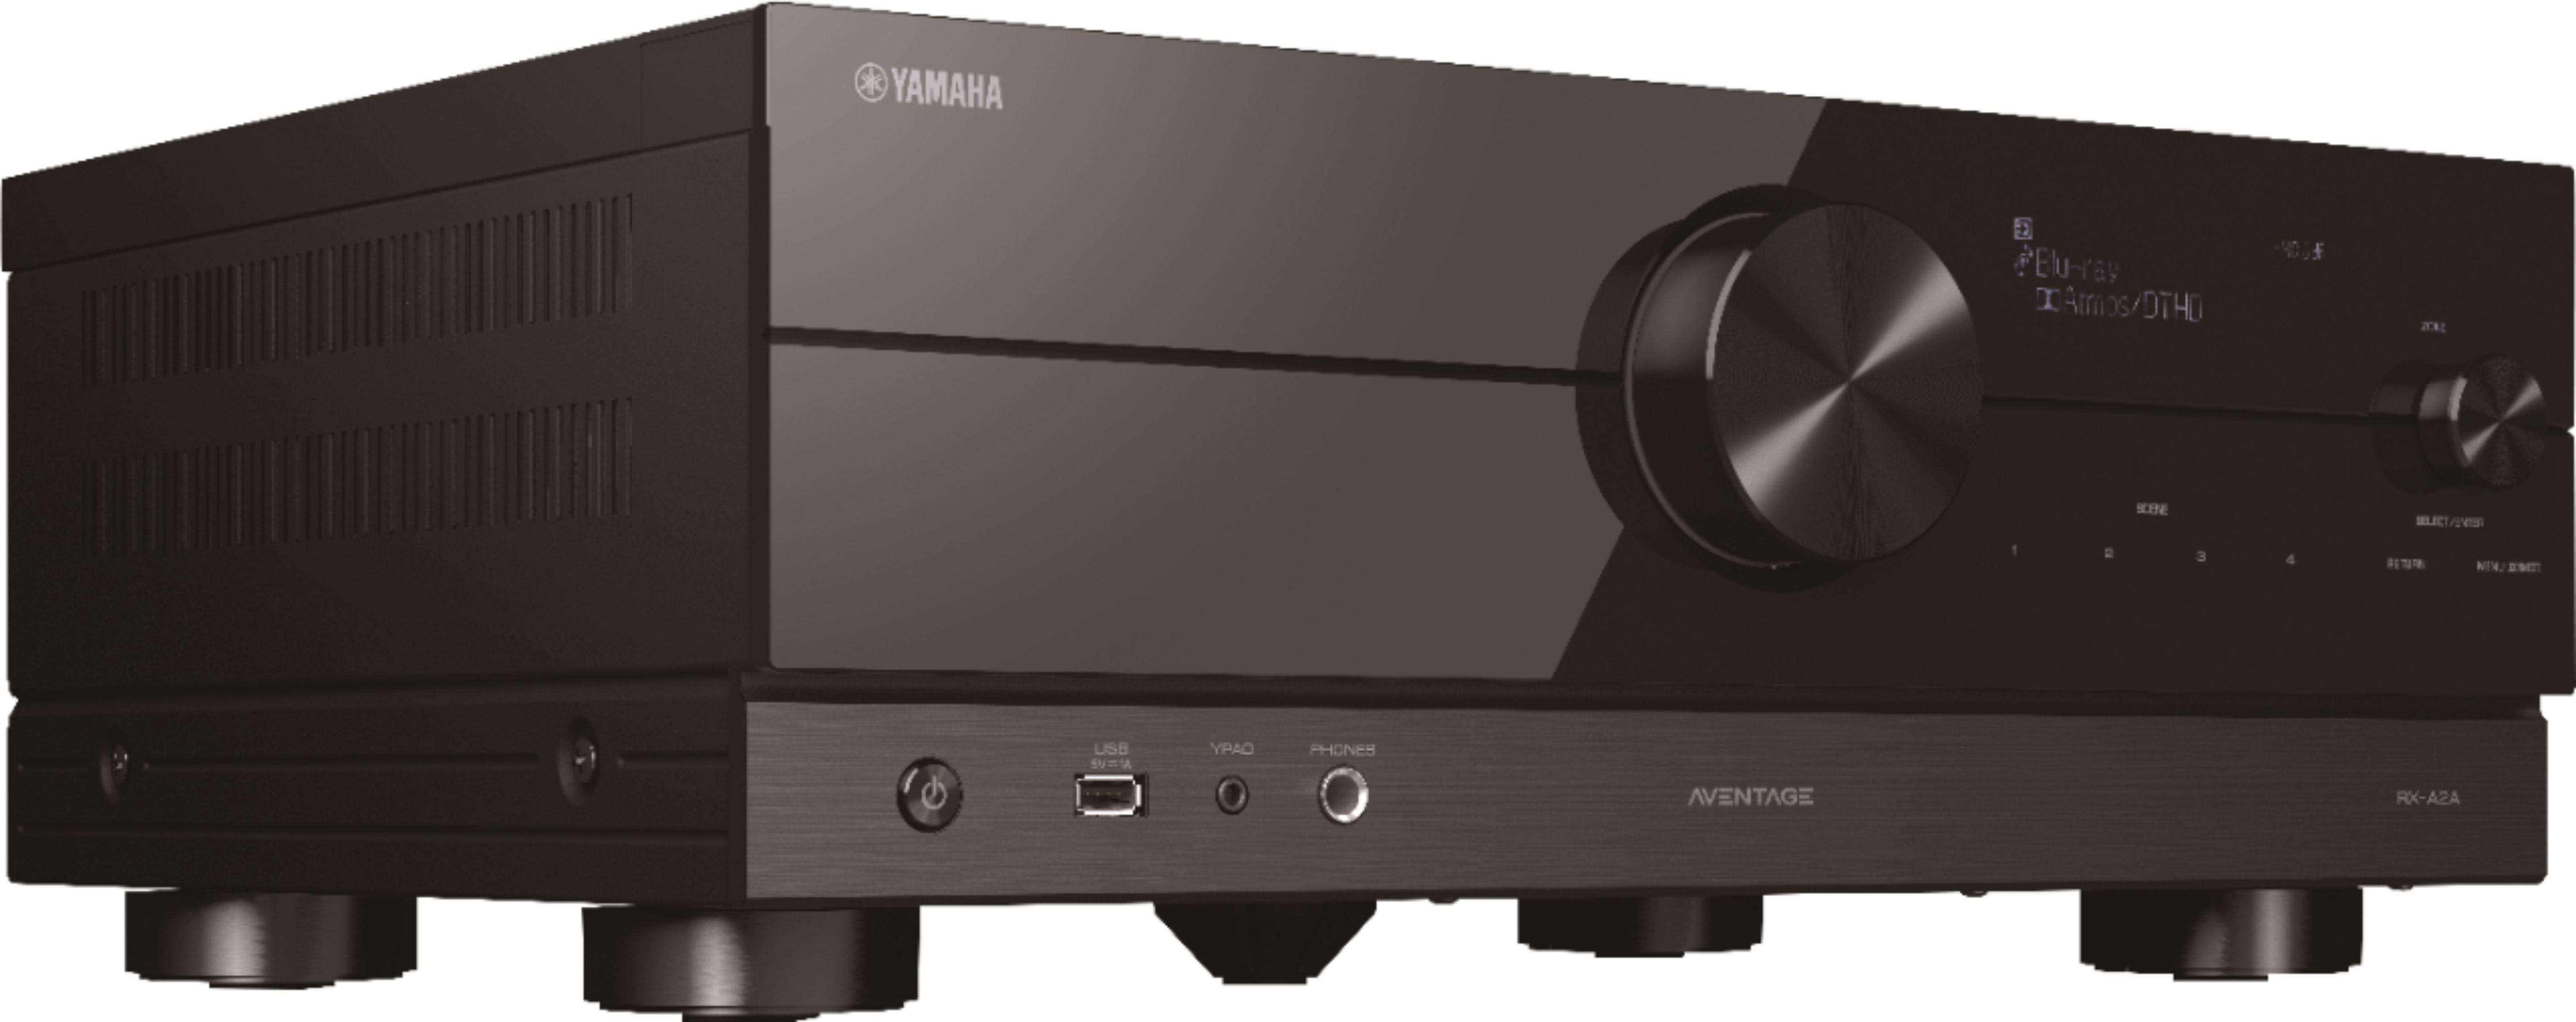 Angle View: Yamaha - AVENTAGE RX-A2A 100W 7.2-Channel AV Receiver with 8K HDMI and MusicCast - Black